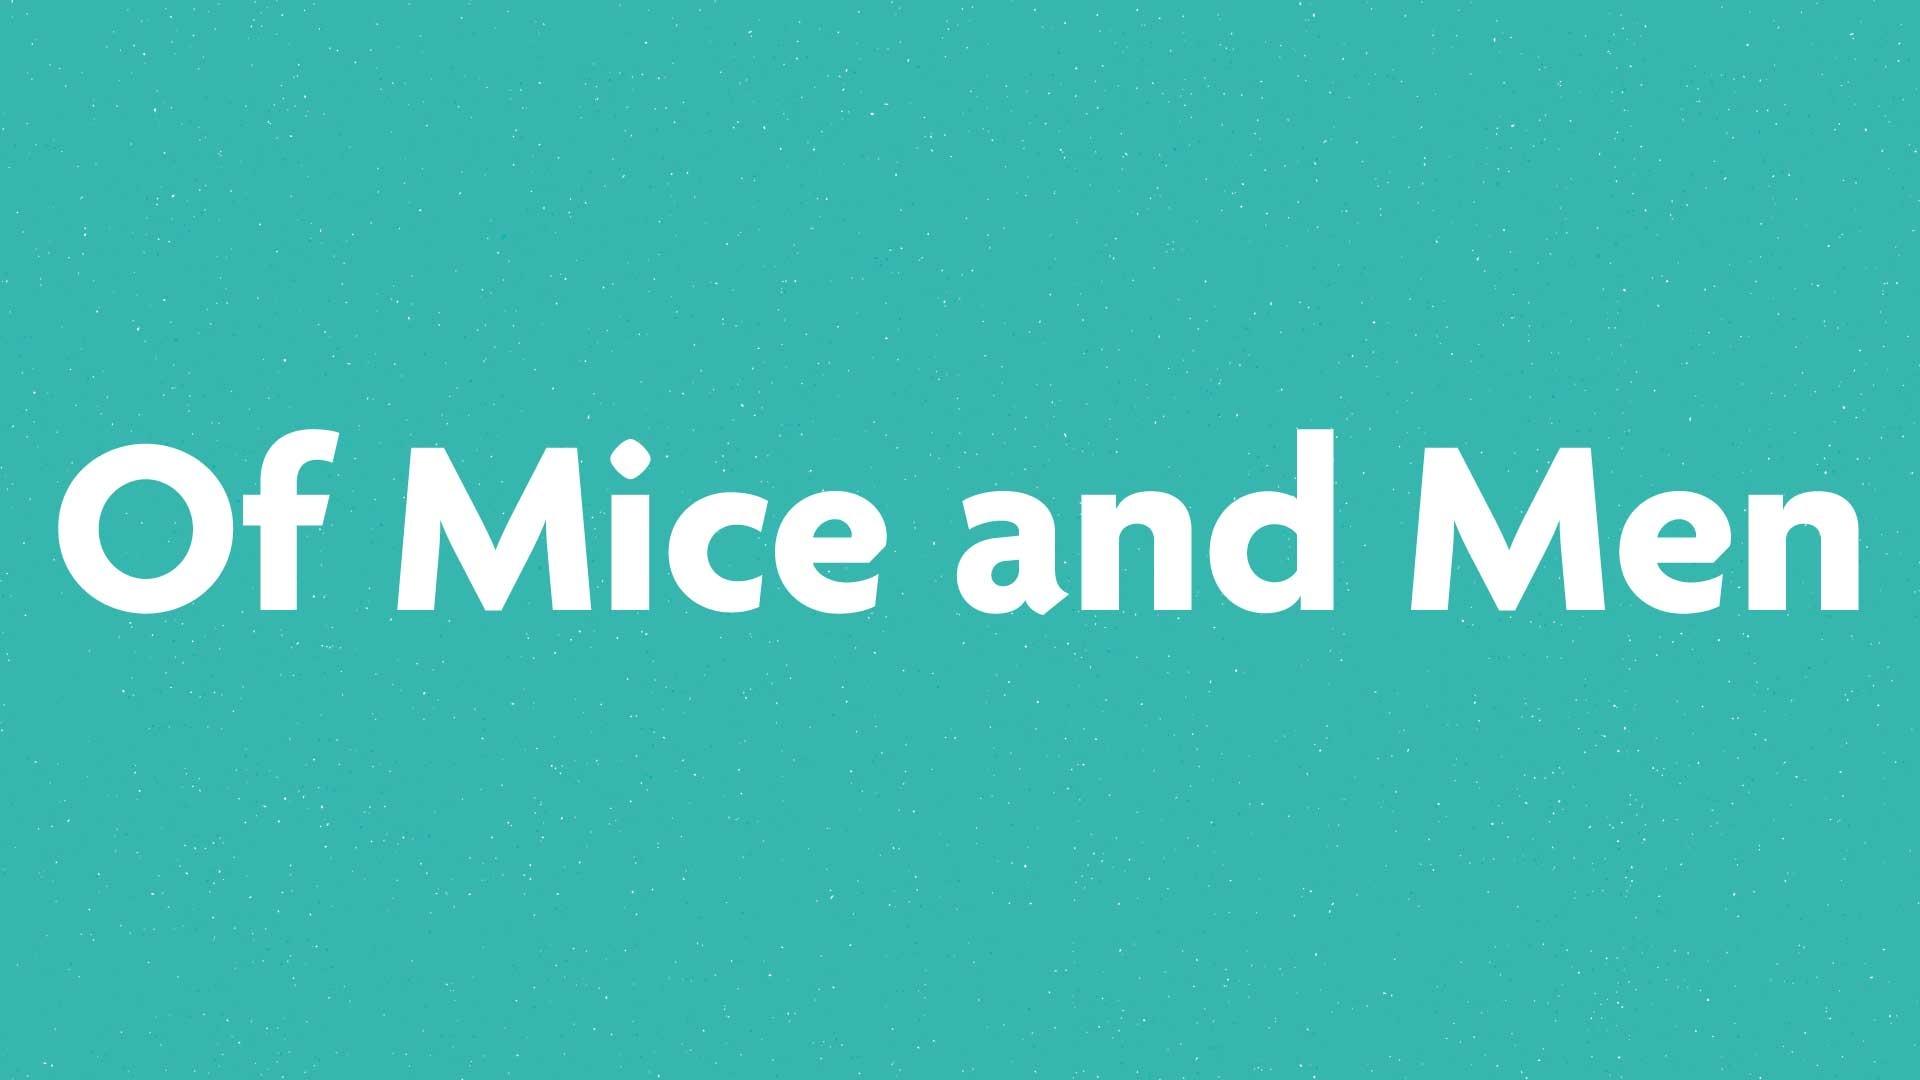 Of Mice and Men book submission card on a green background.